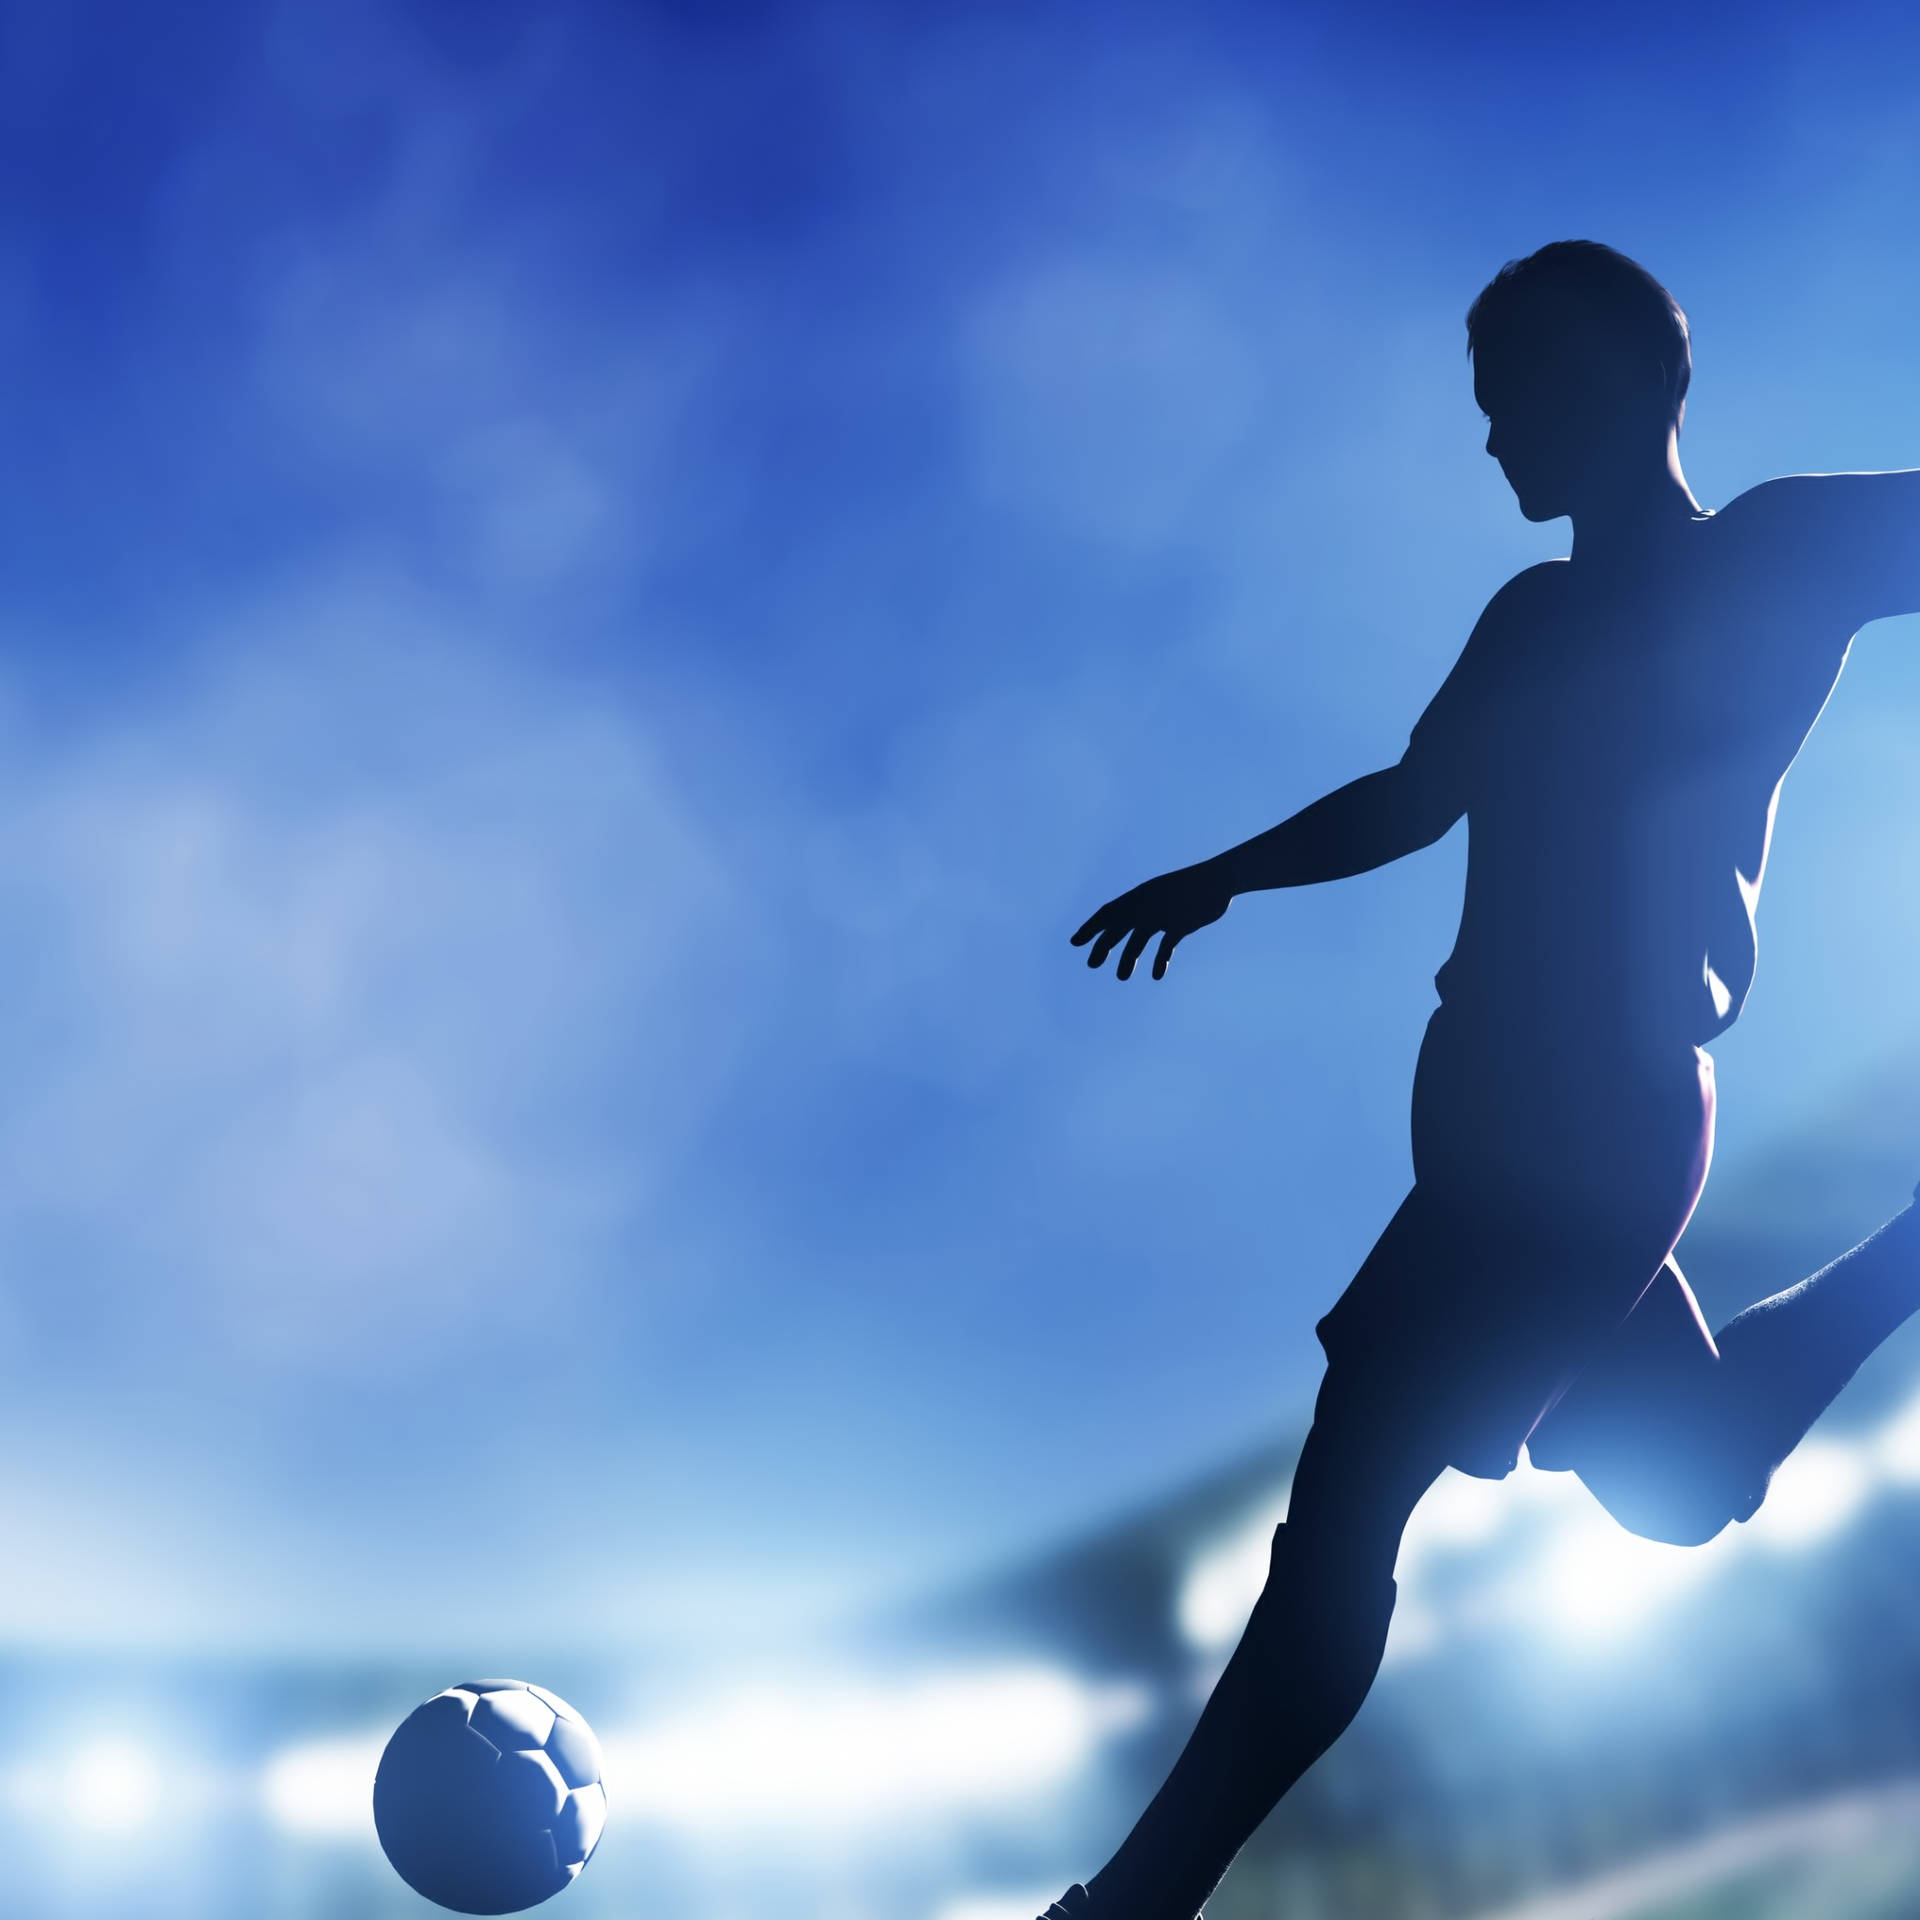 Soccer Players Silhouette Wallpaper